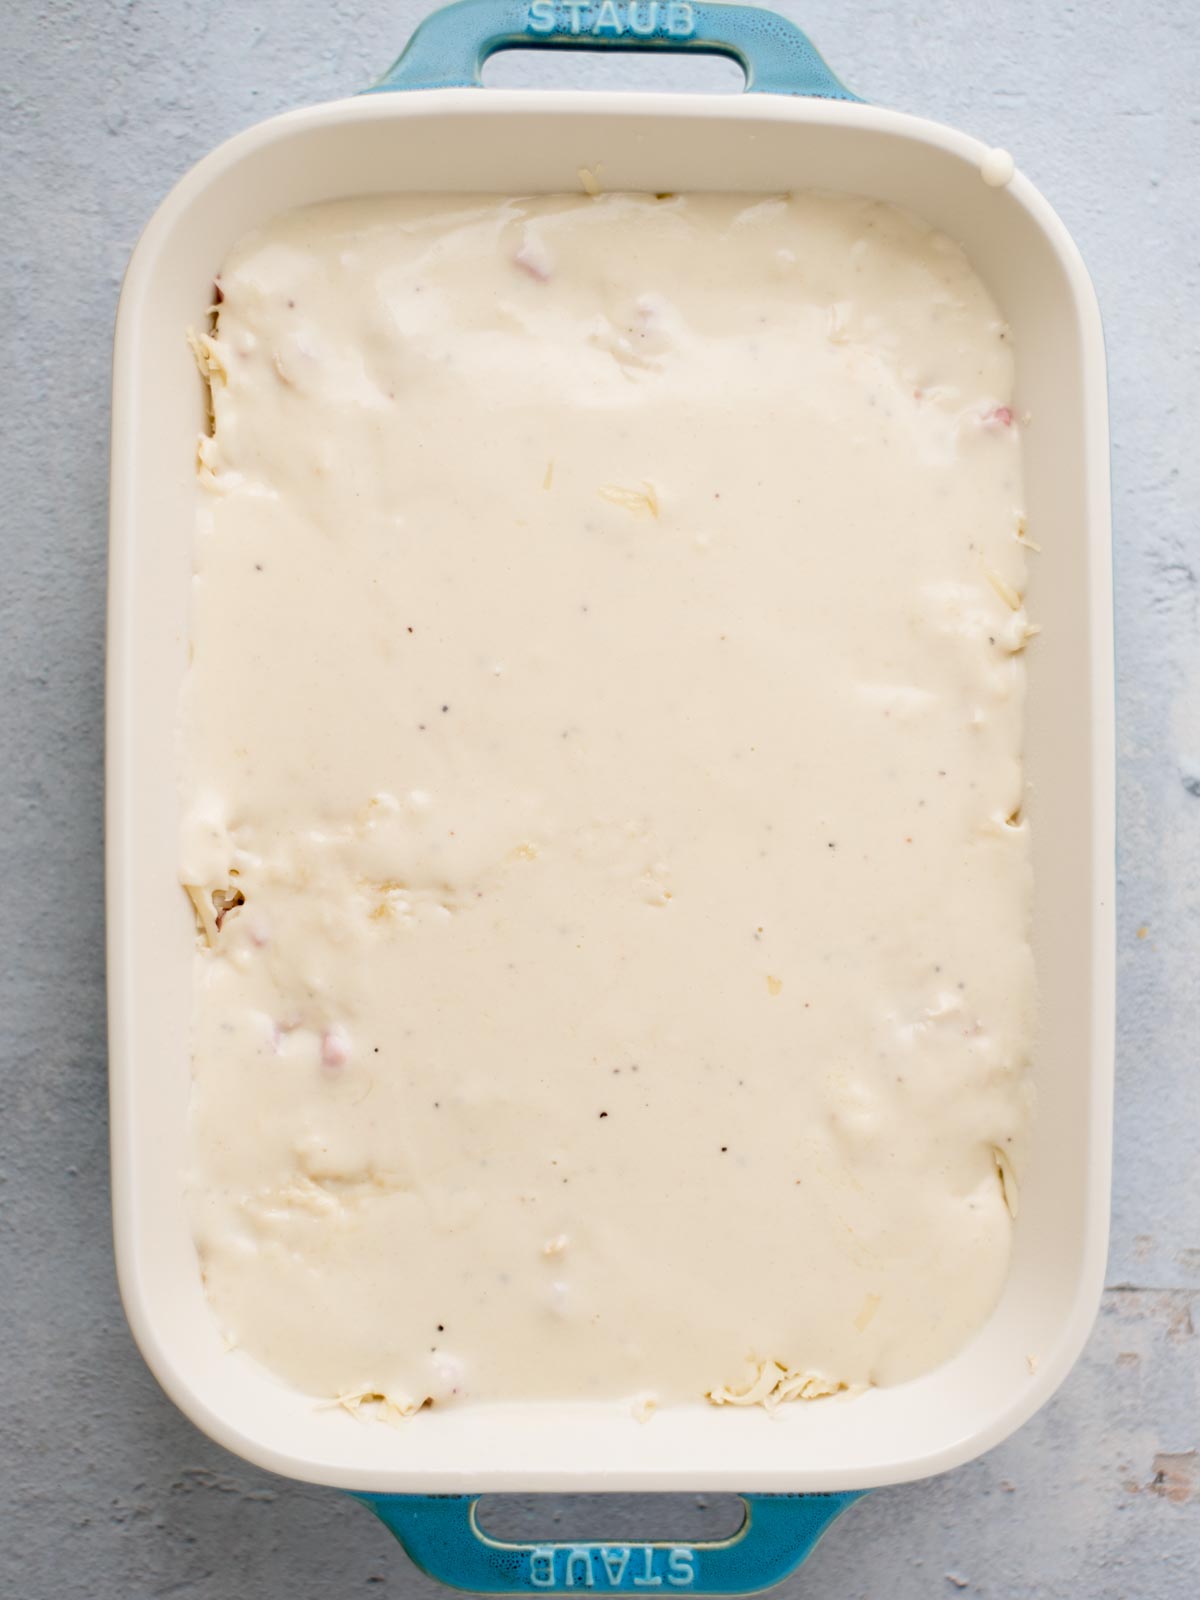 chicken cordon bleu casserole assembly where the sauce has been poured over the Swiss cheese